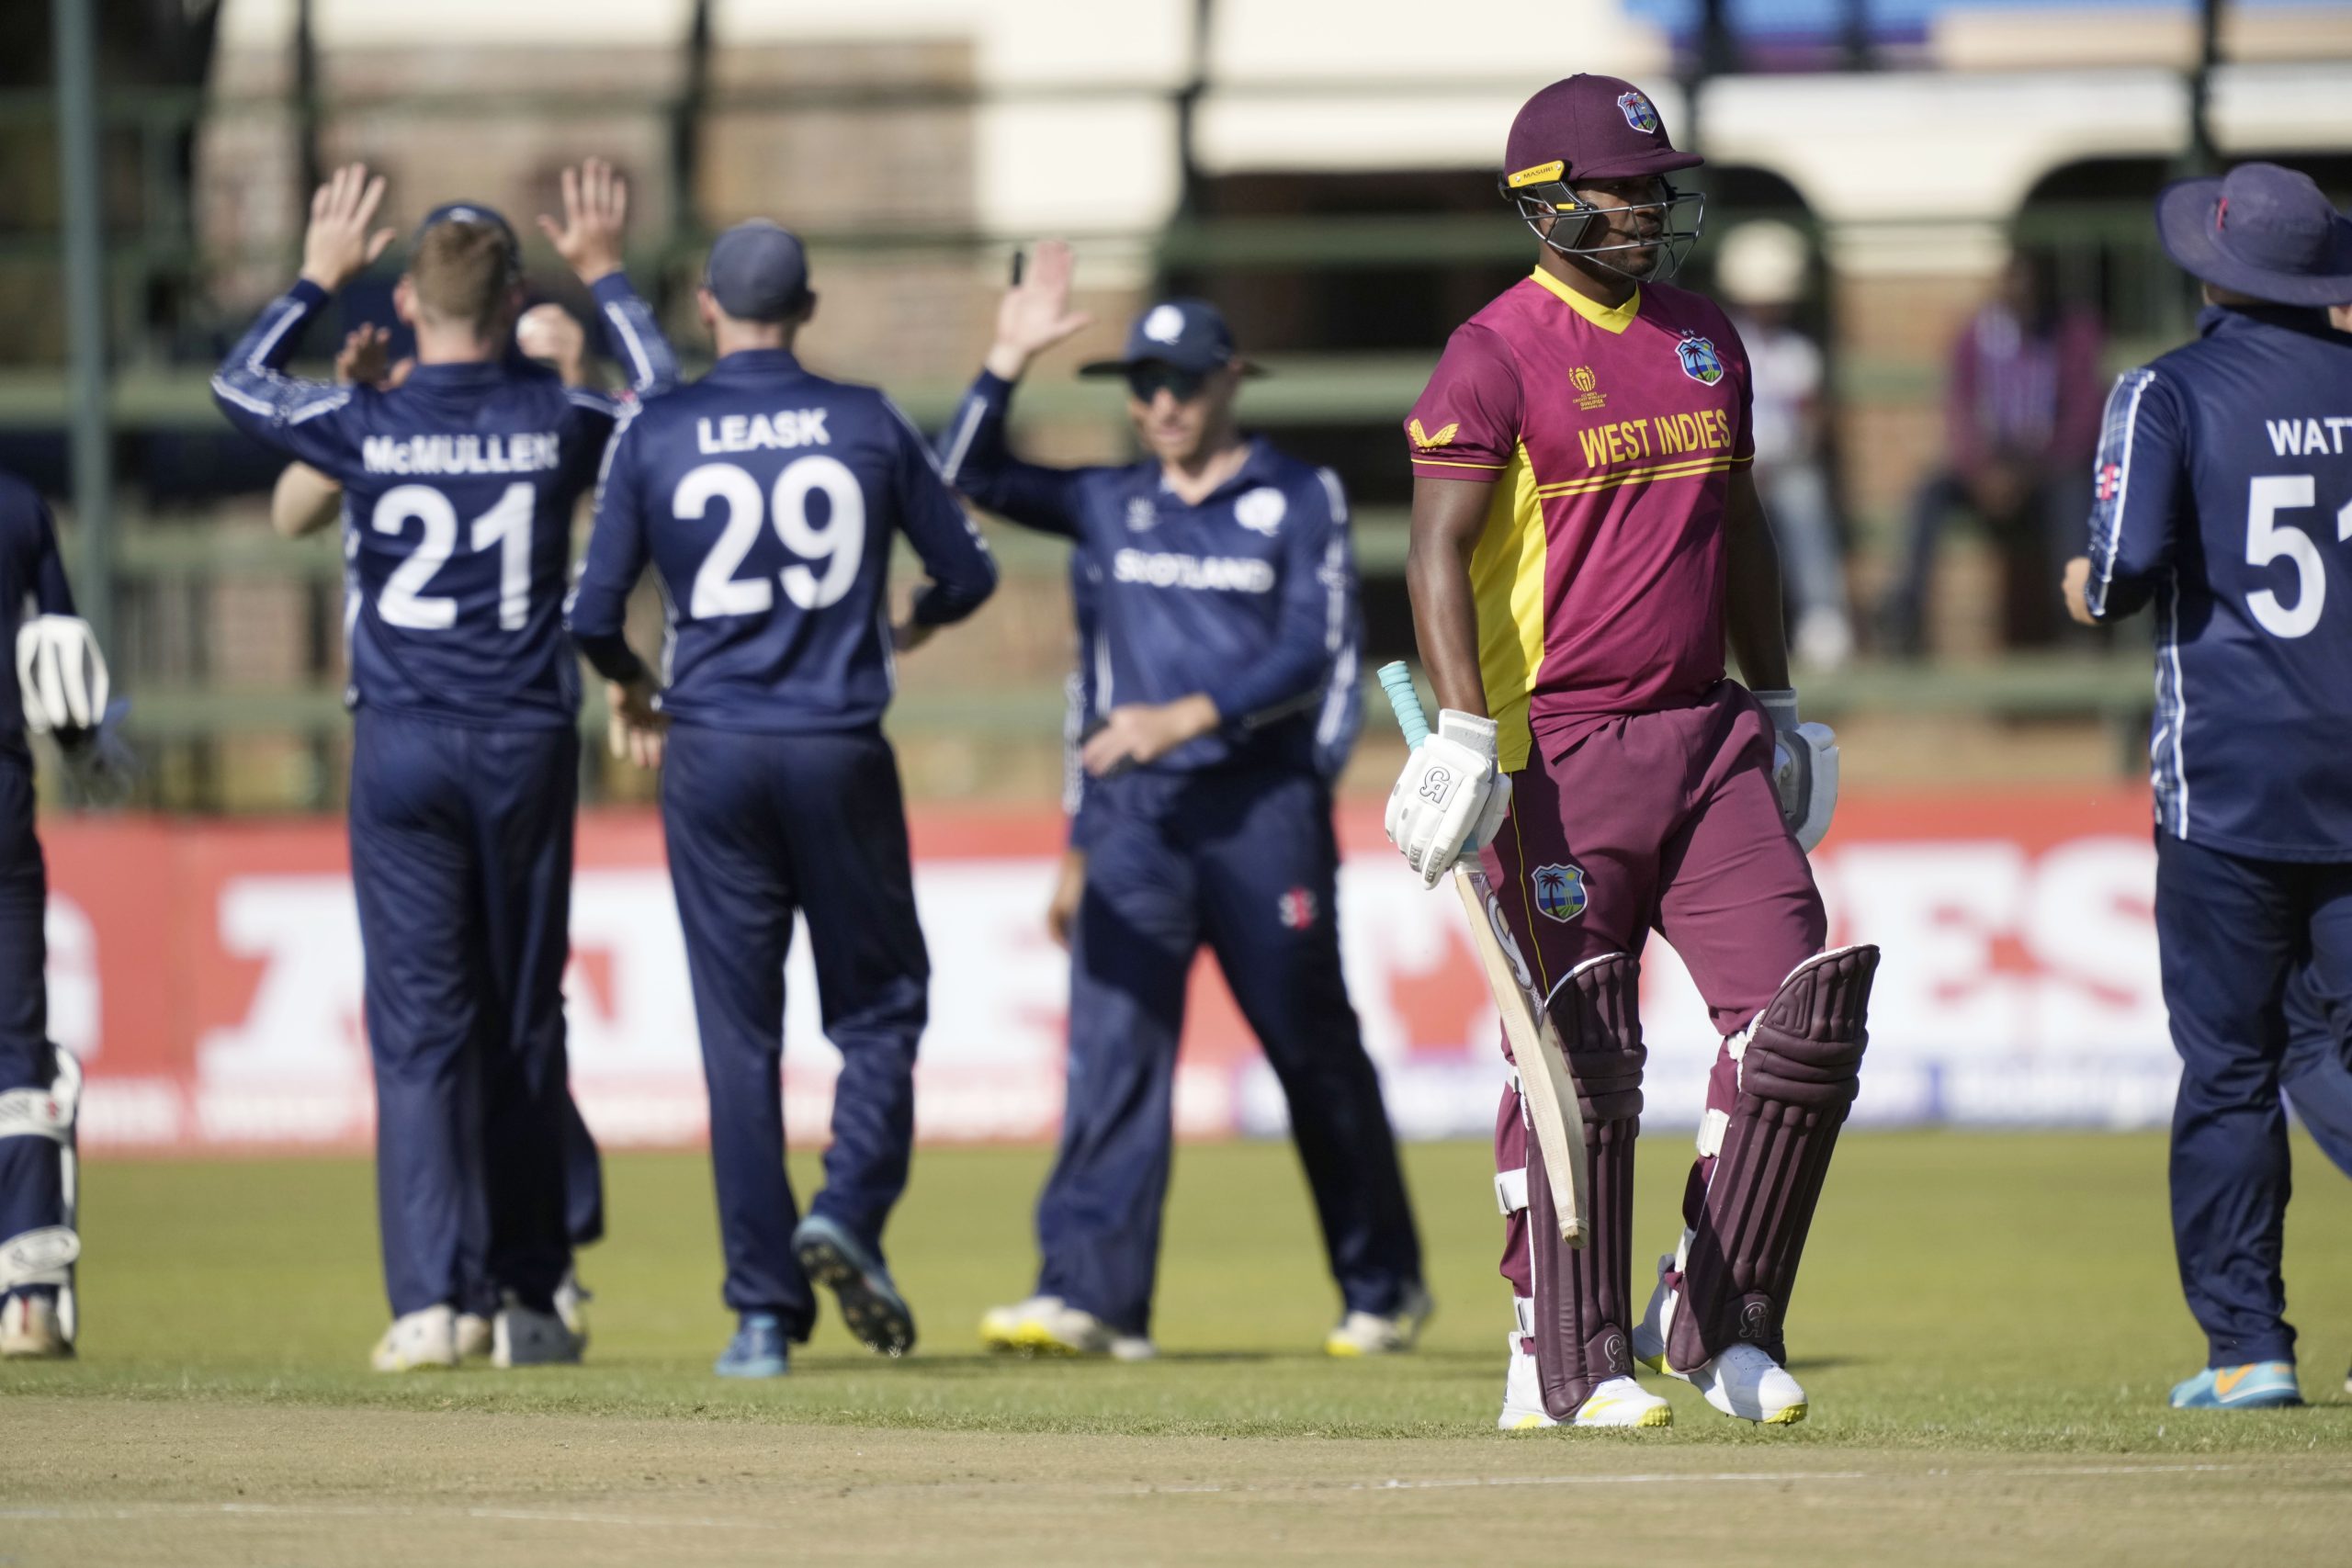 West Indies to miss World Cup for first time as Scotland claim historic win